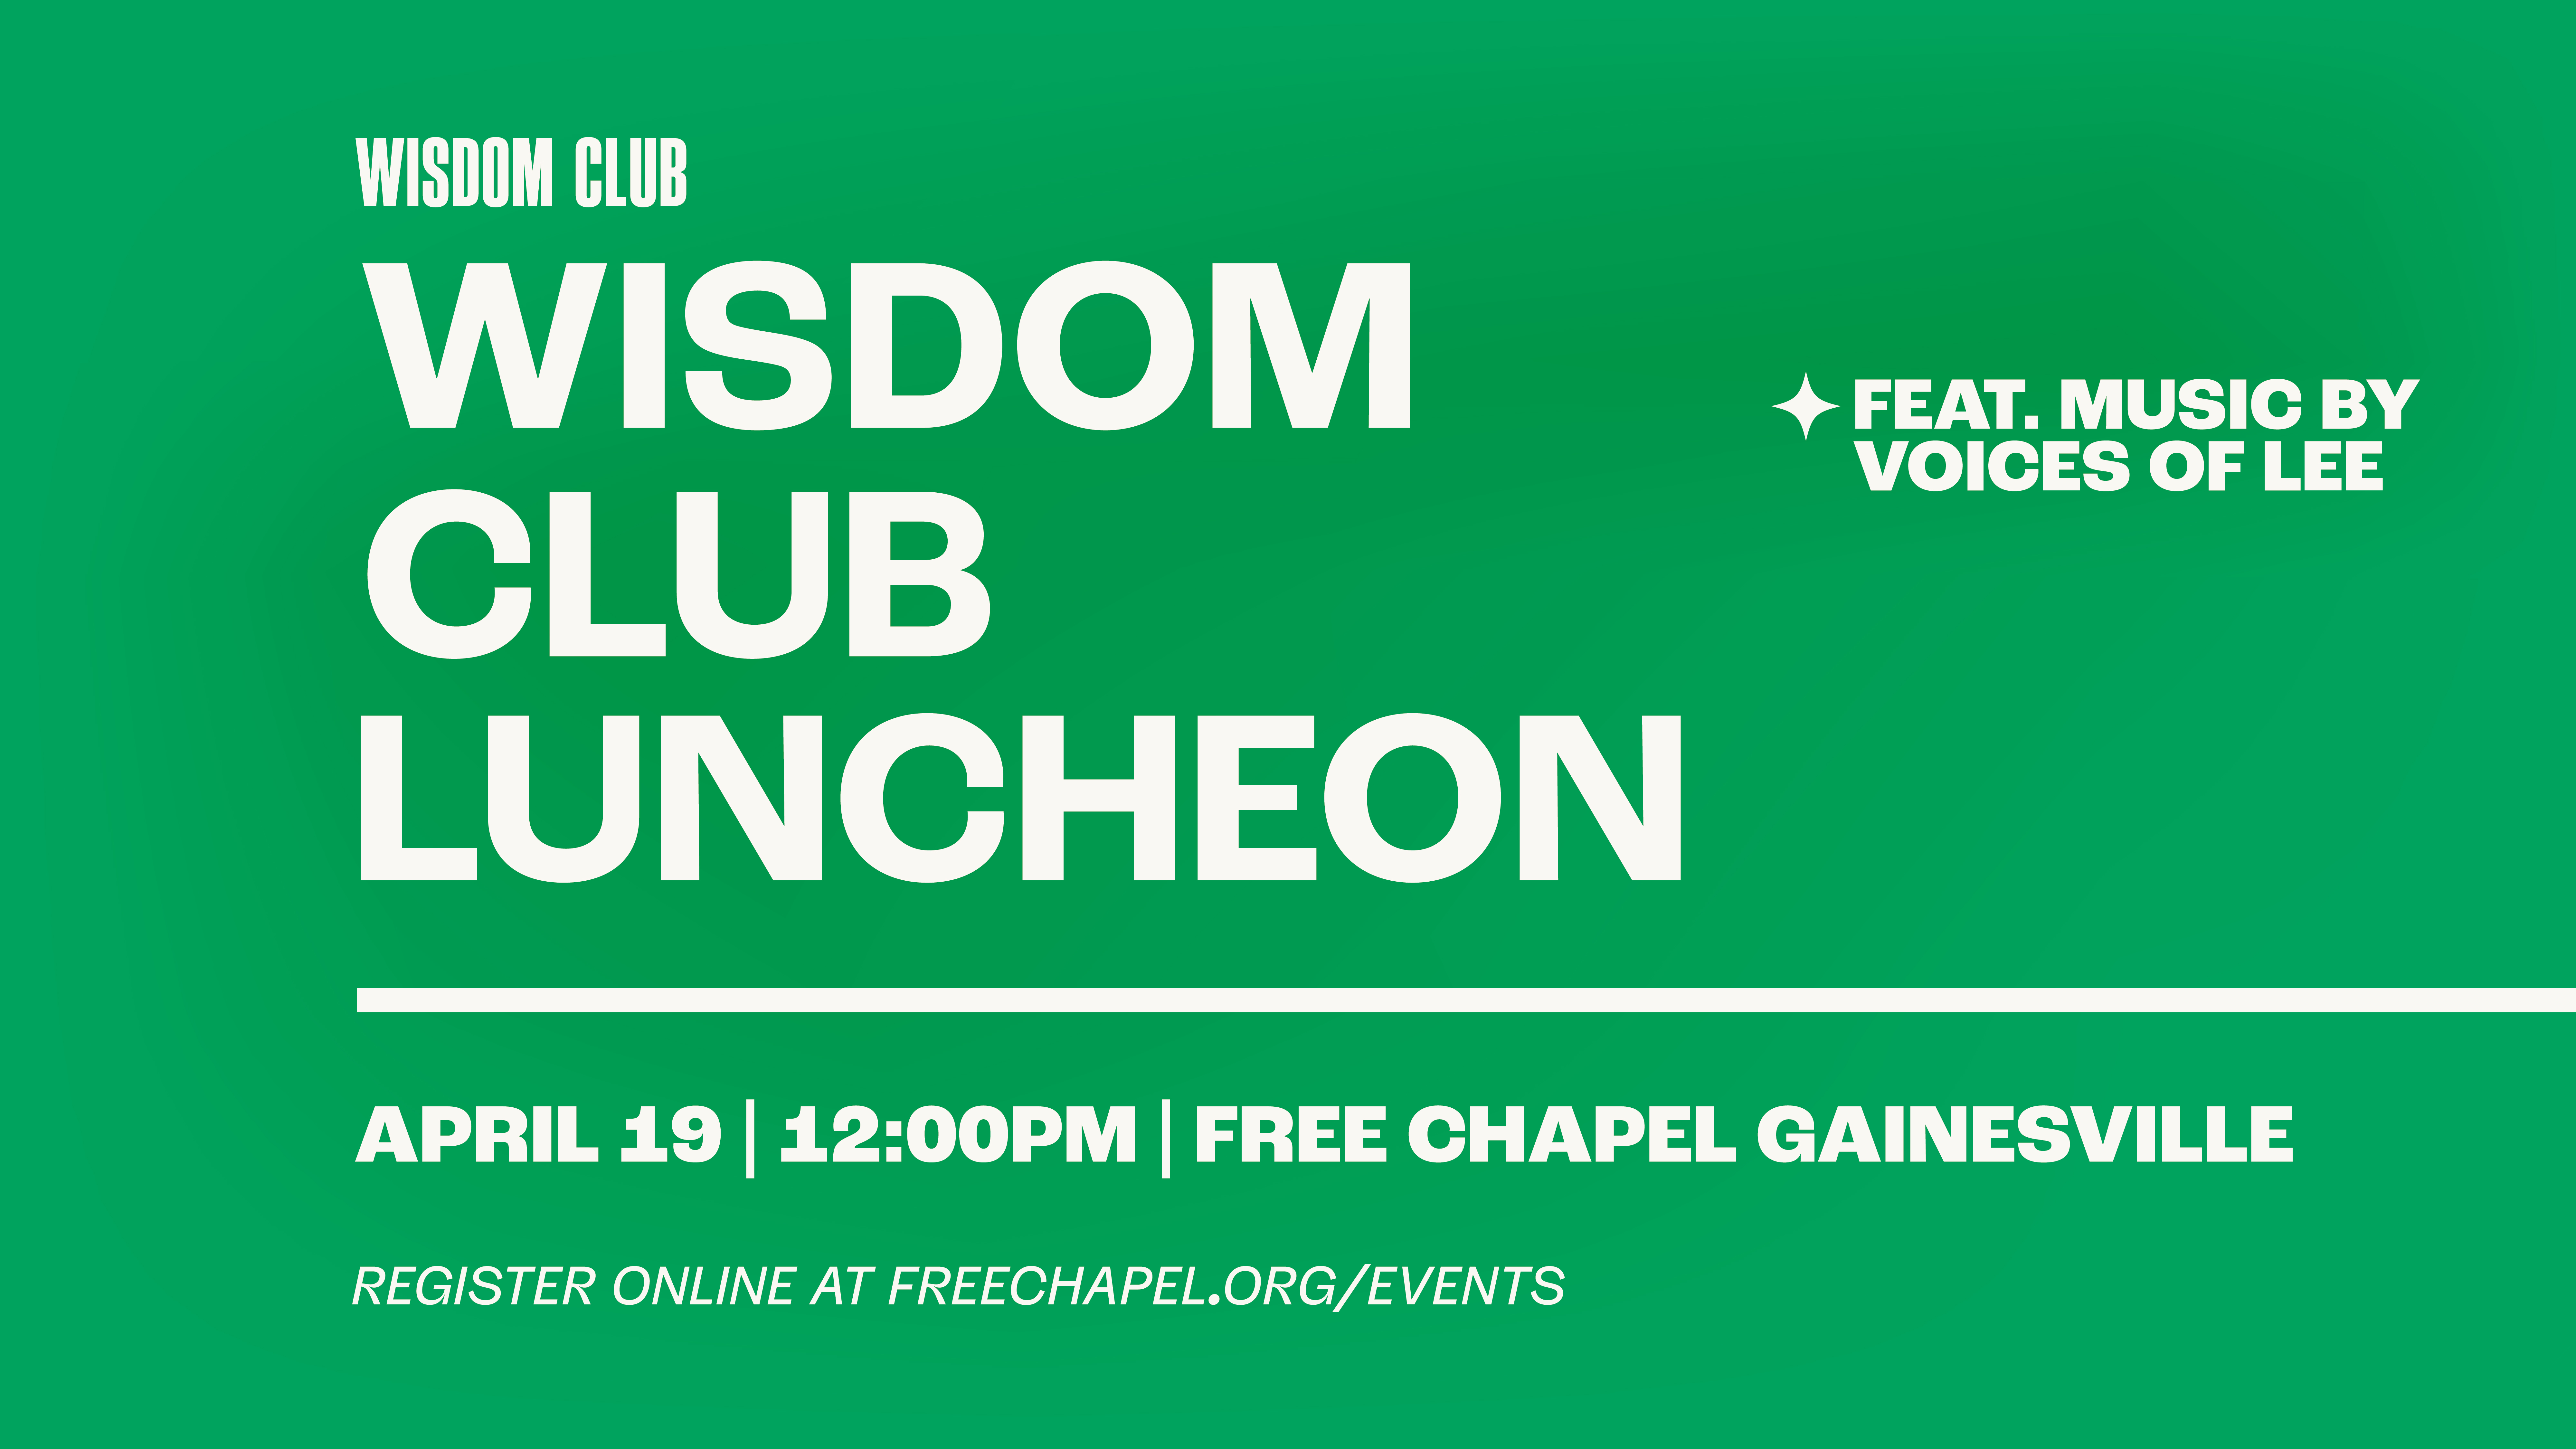 Wisdom Club Luncheon  at the Gainesville campus